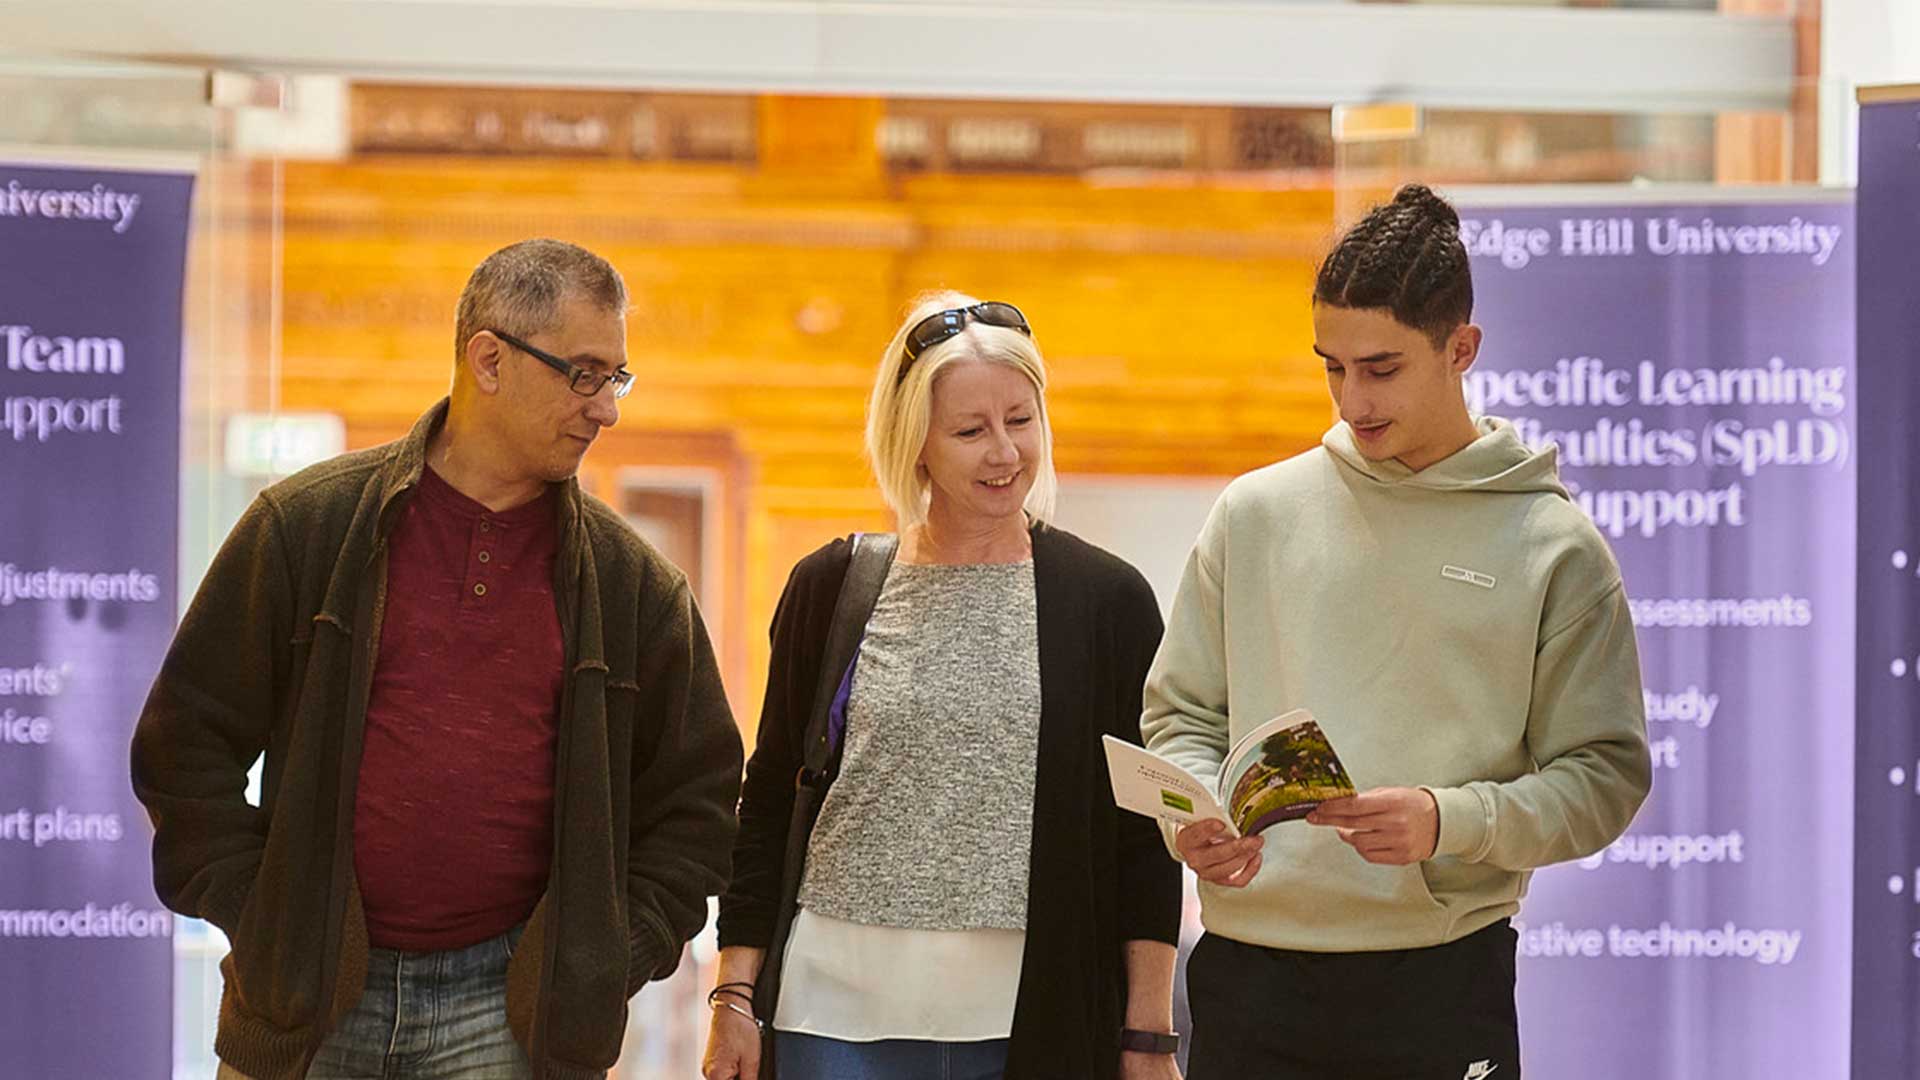 A student walks through the Hub with their parents on an Open Day. They are looking through a printed Edge Hill University guide